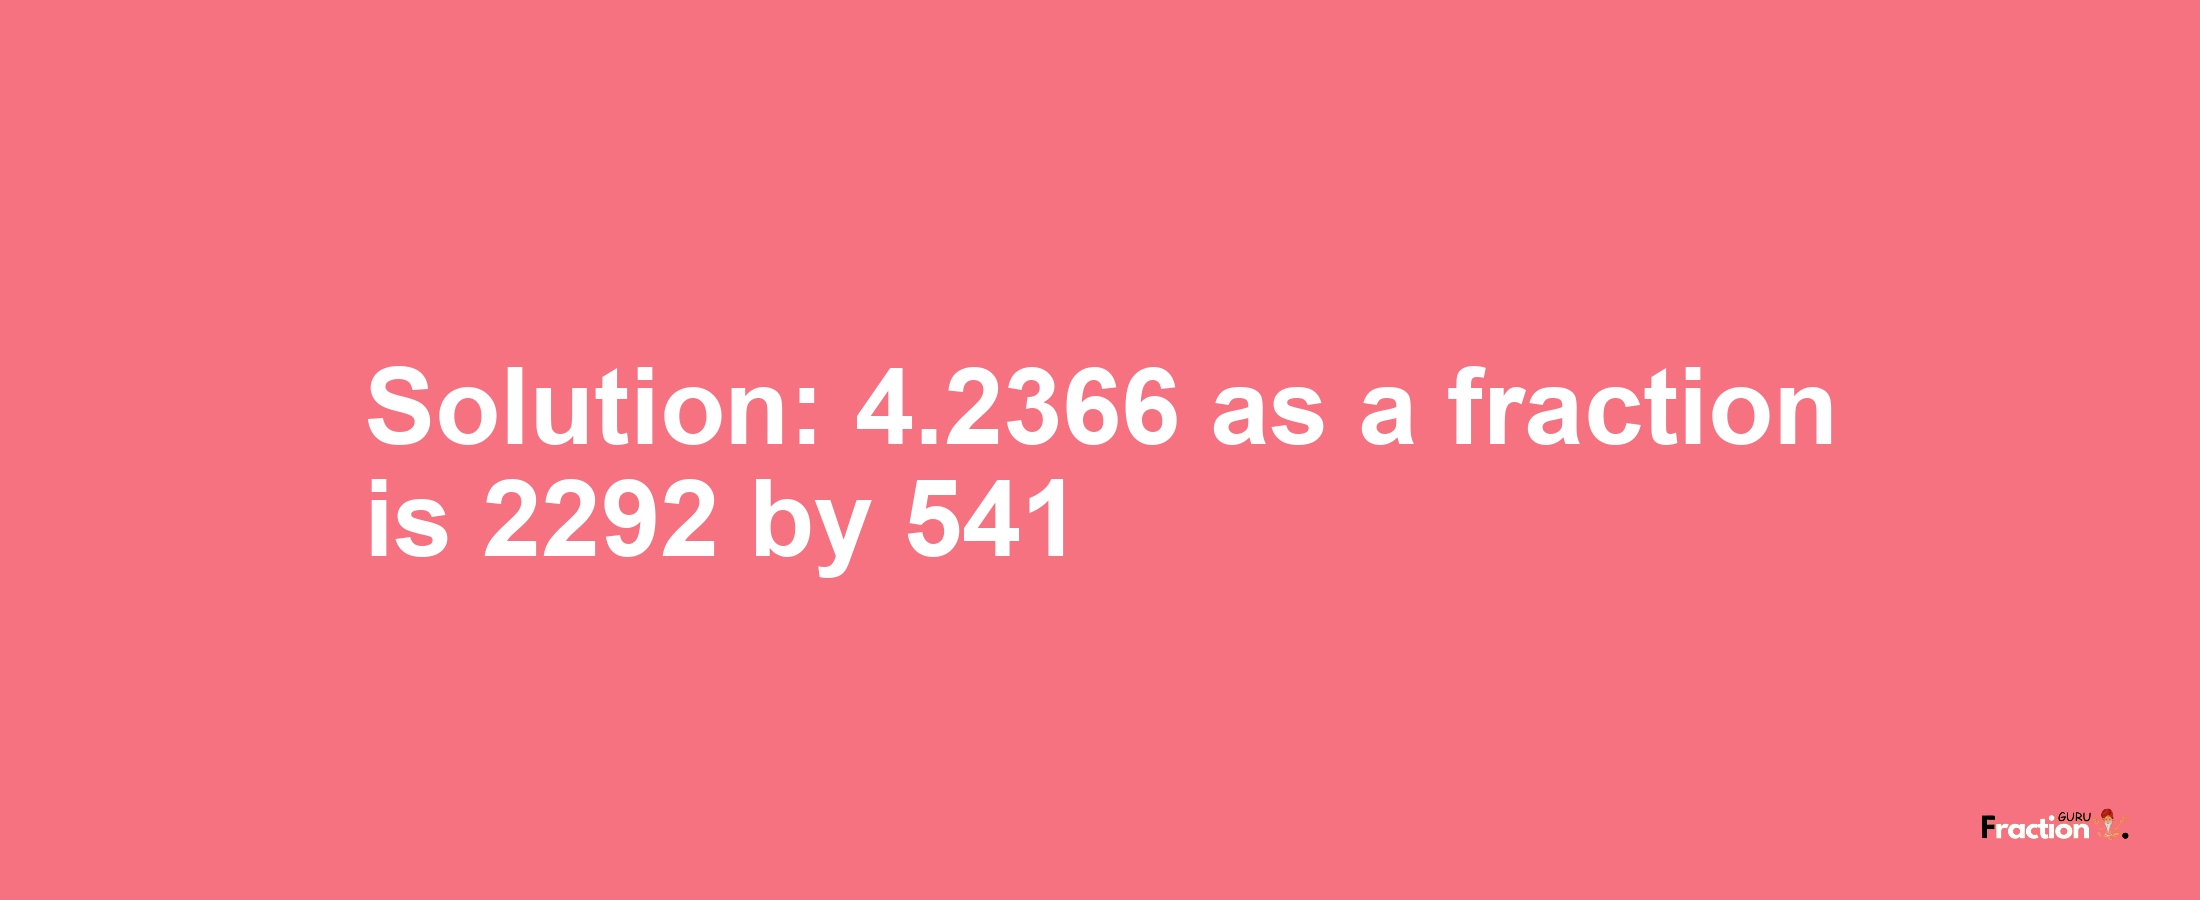 Solution:4.2366 as a fraction is 2292/541